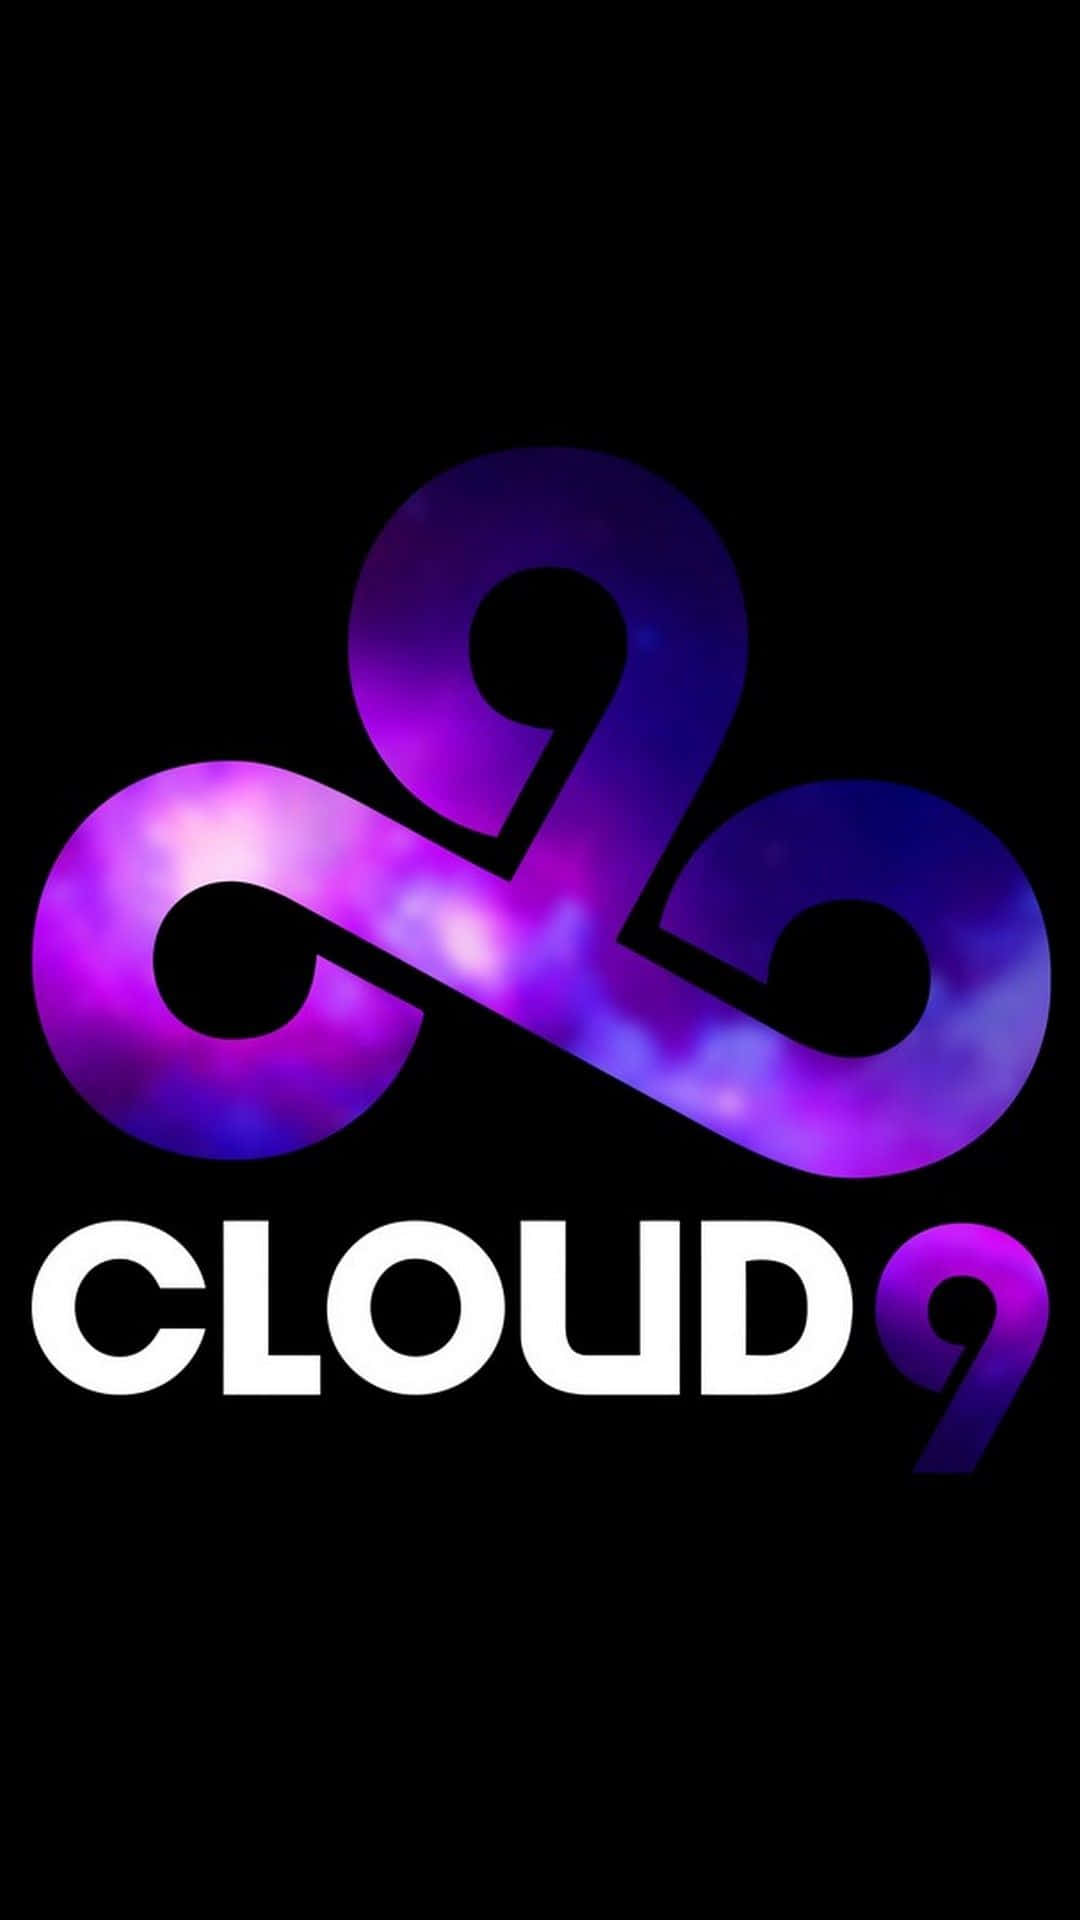 Cloud 9 Logo With Purple And Blue Colors Wallpaper